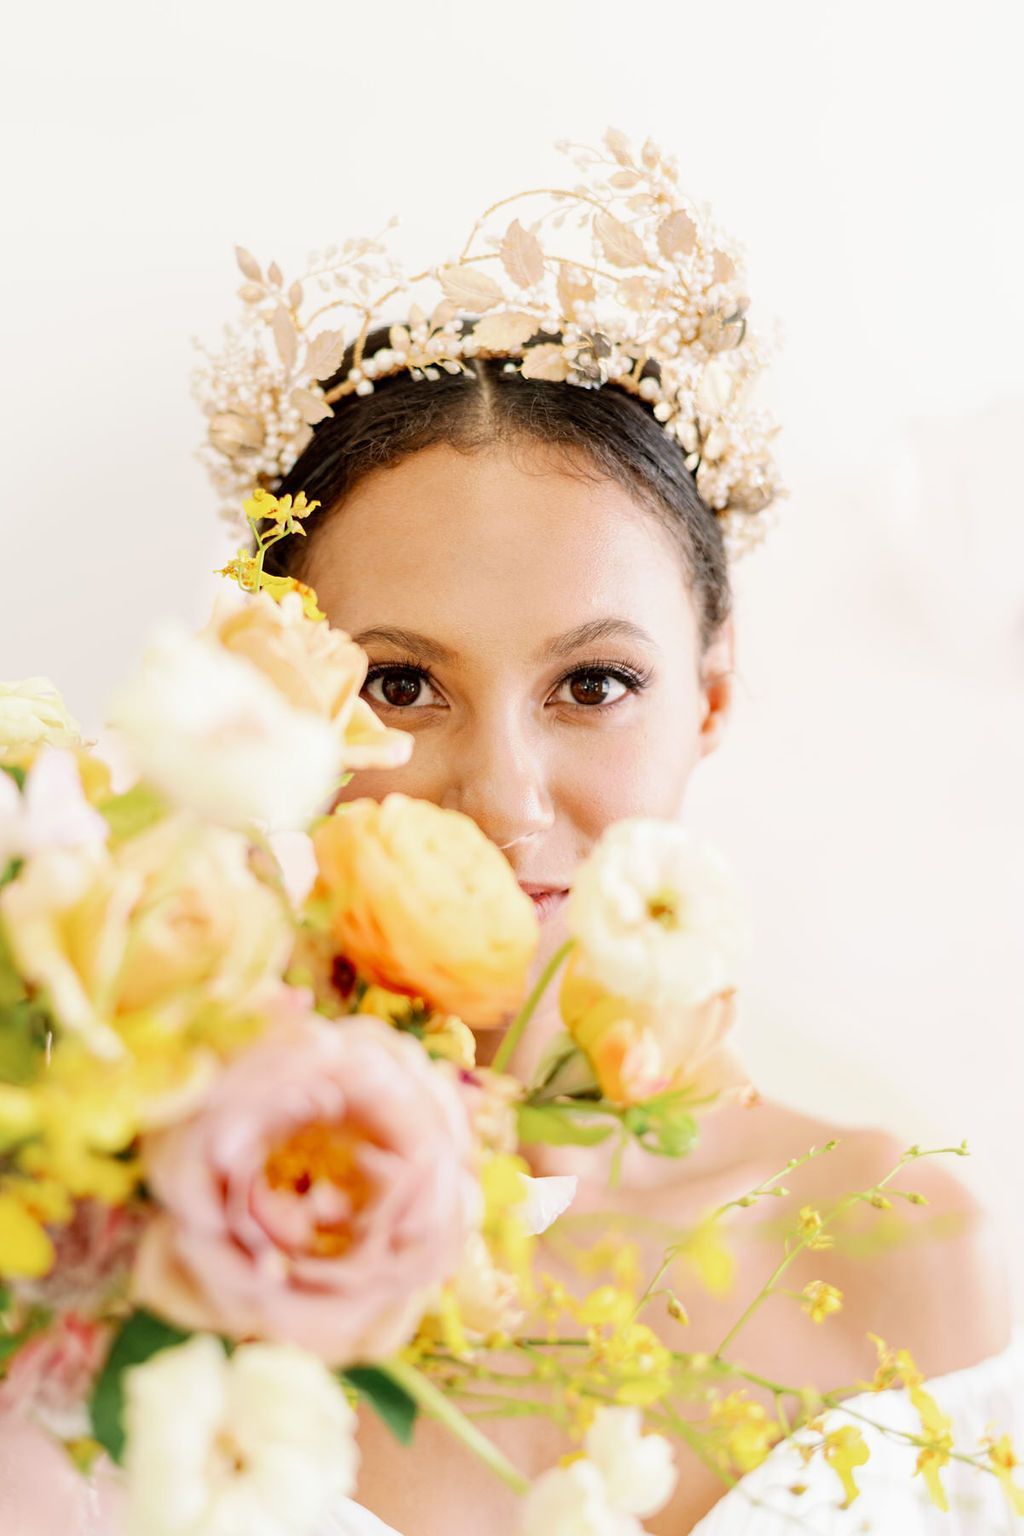 A model wears a statement pale gold and pearl wedding crown headdress and holds a bouquet of pastel coloured flowers